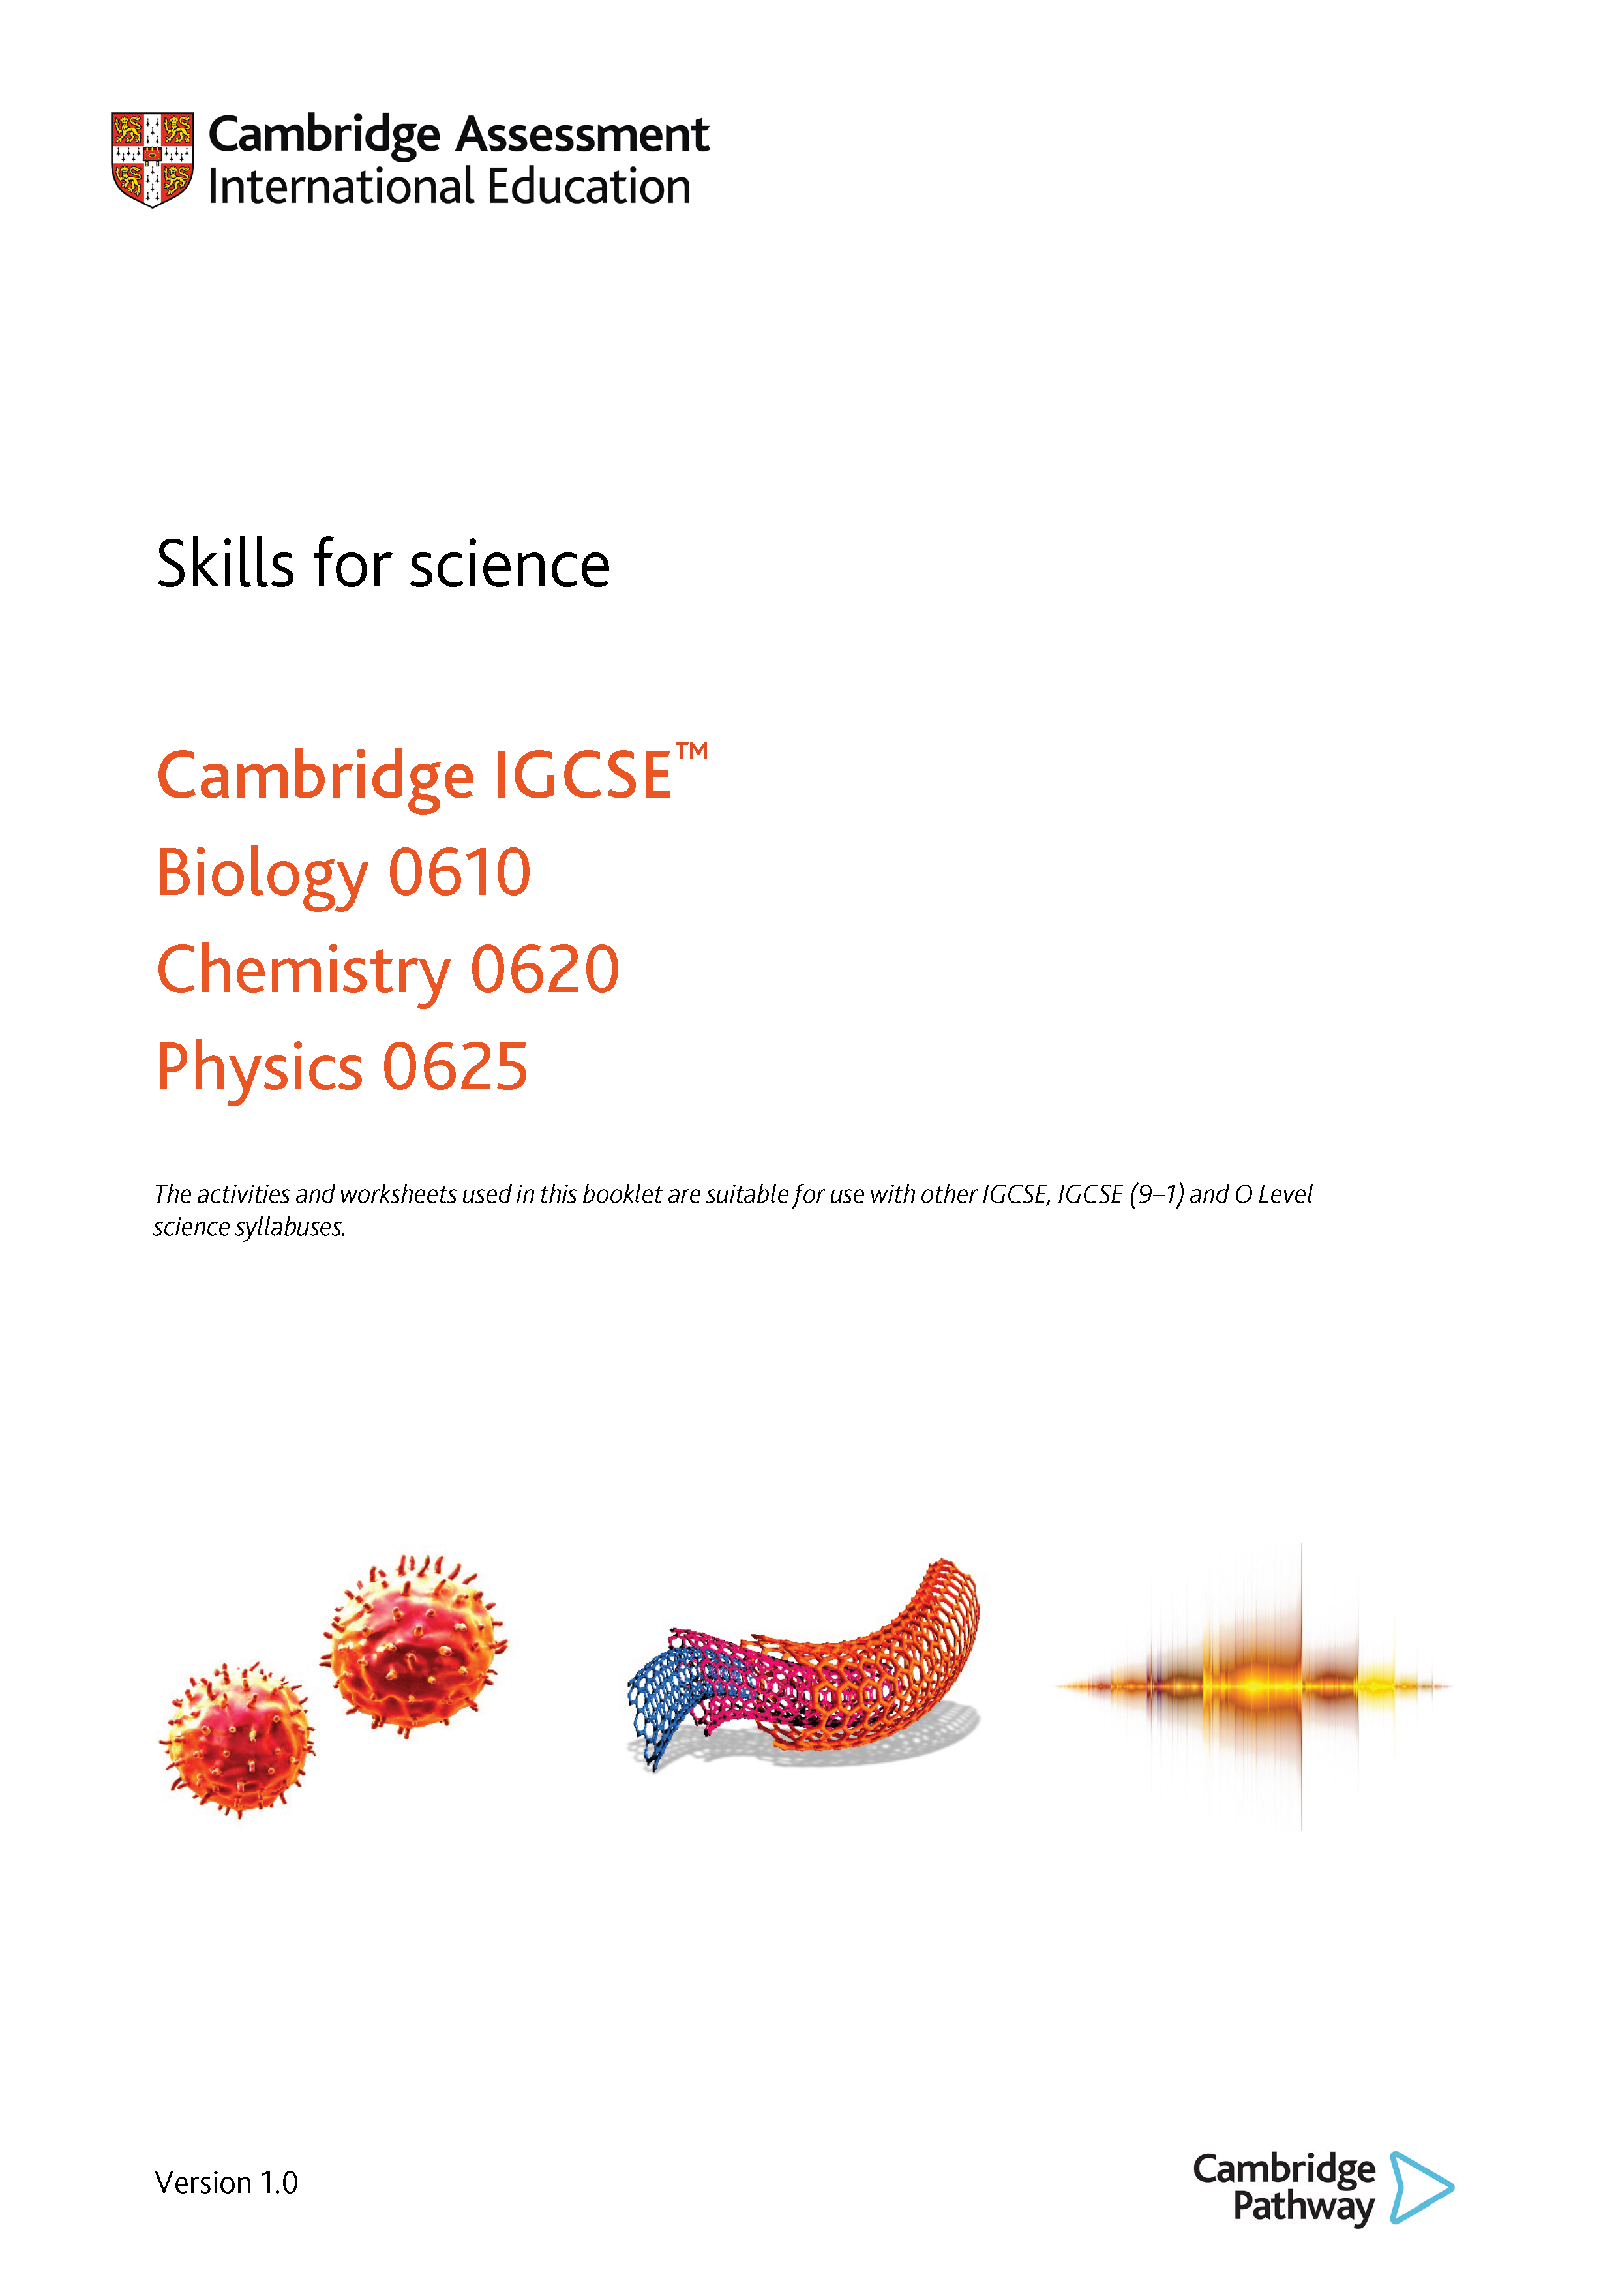 Skills for science - Evaluating